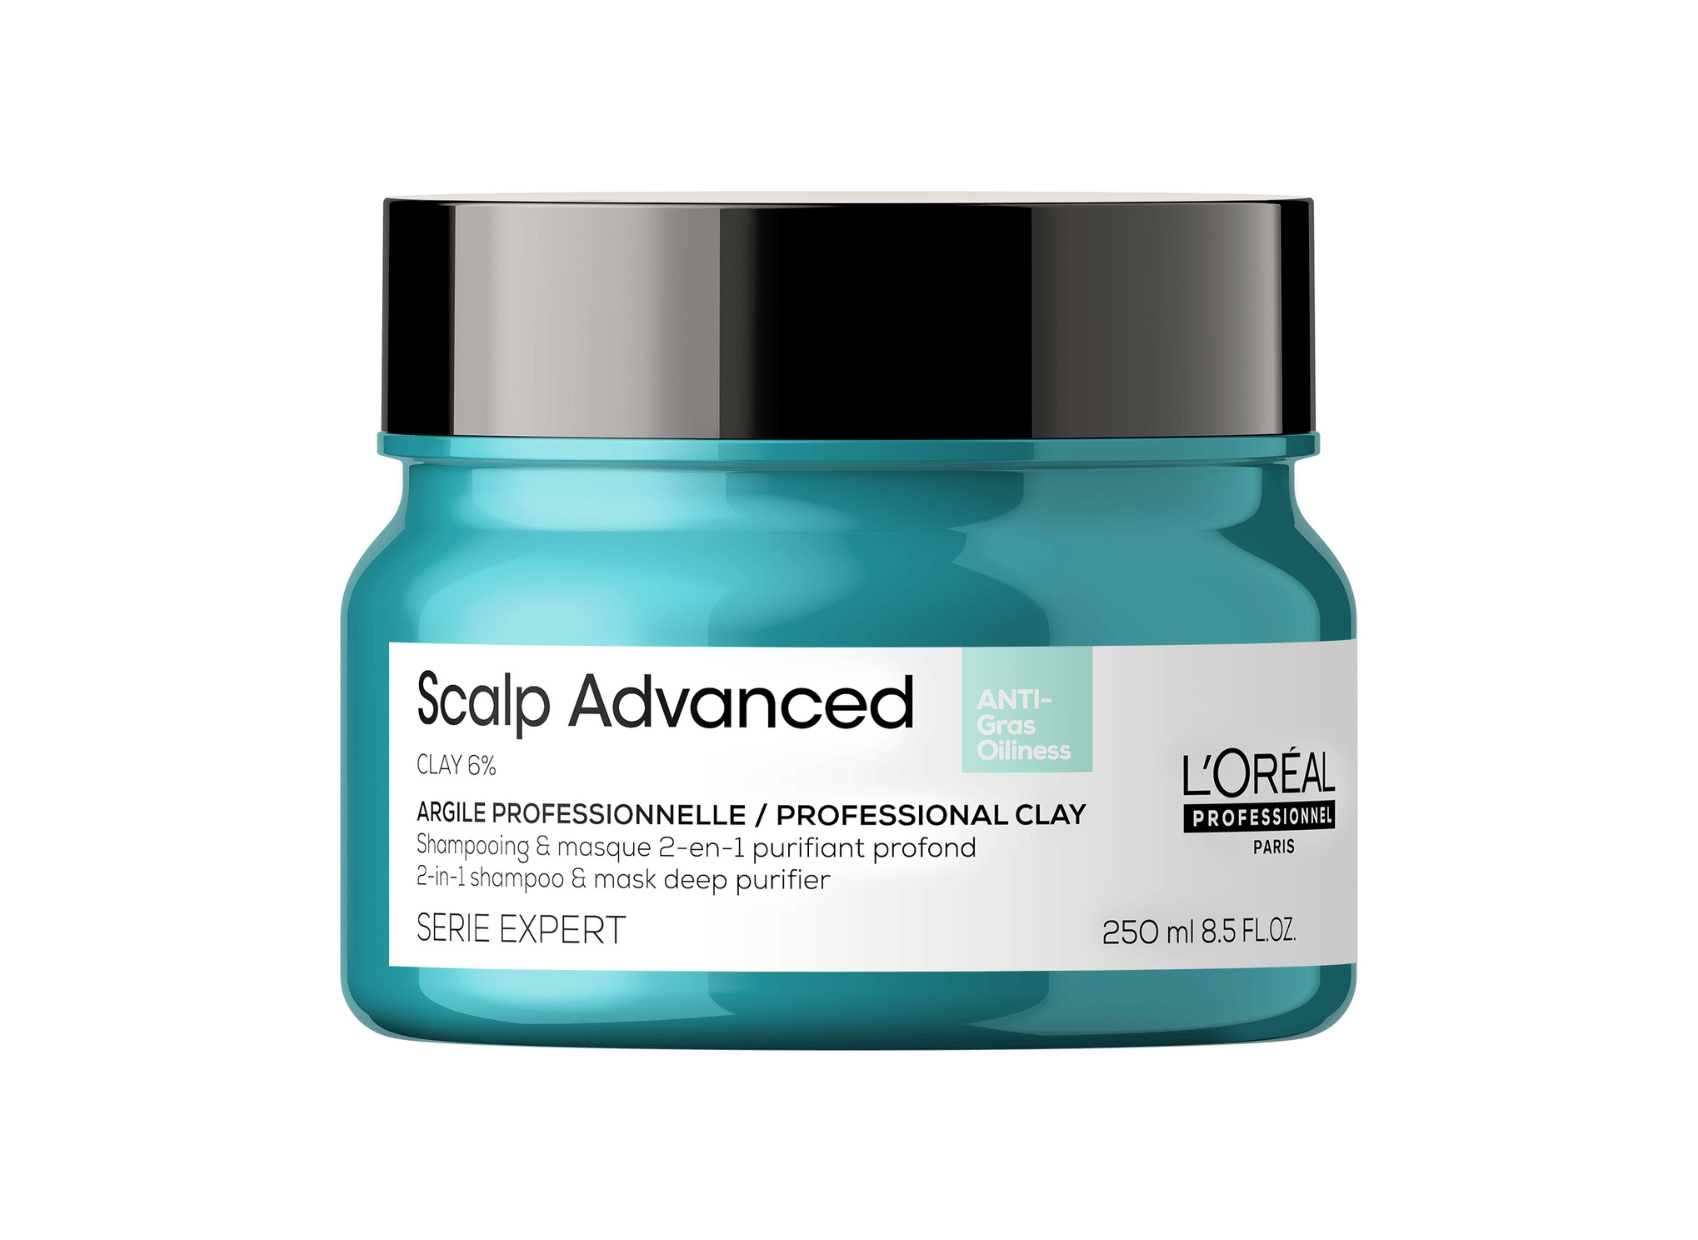 L'Oreal Serie Expert Scalp Advanced Anti-Oiliness 2in1 Deep Purifier Clay 250 ml